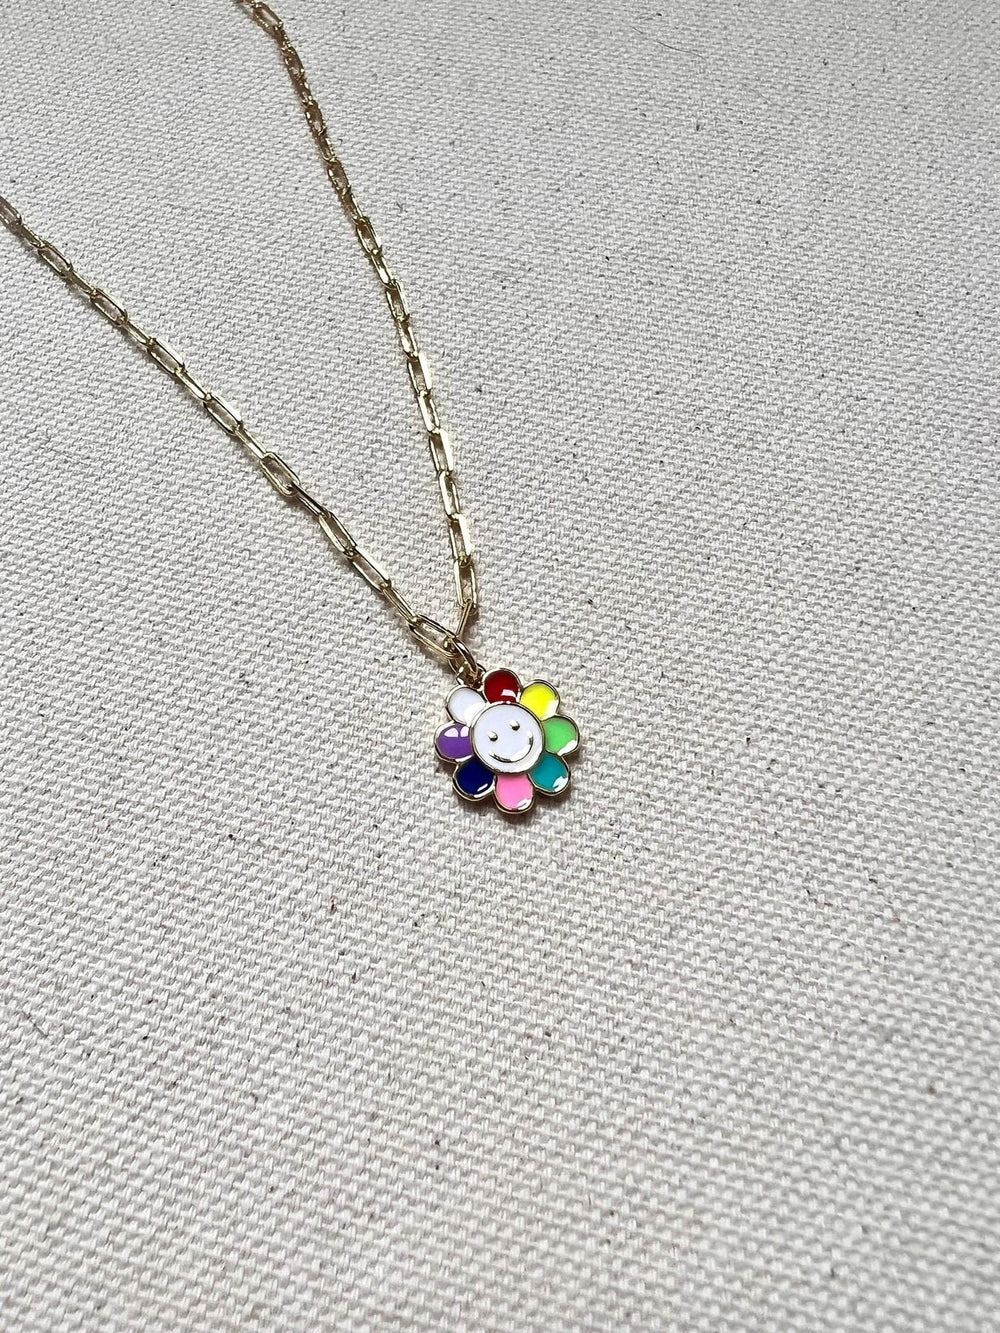 Happy Flower Necklace Necklaces Style 1 - Small paperclip chain: 60cm (ca. 24”) Necklace